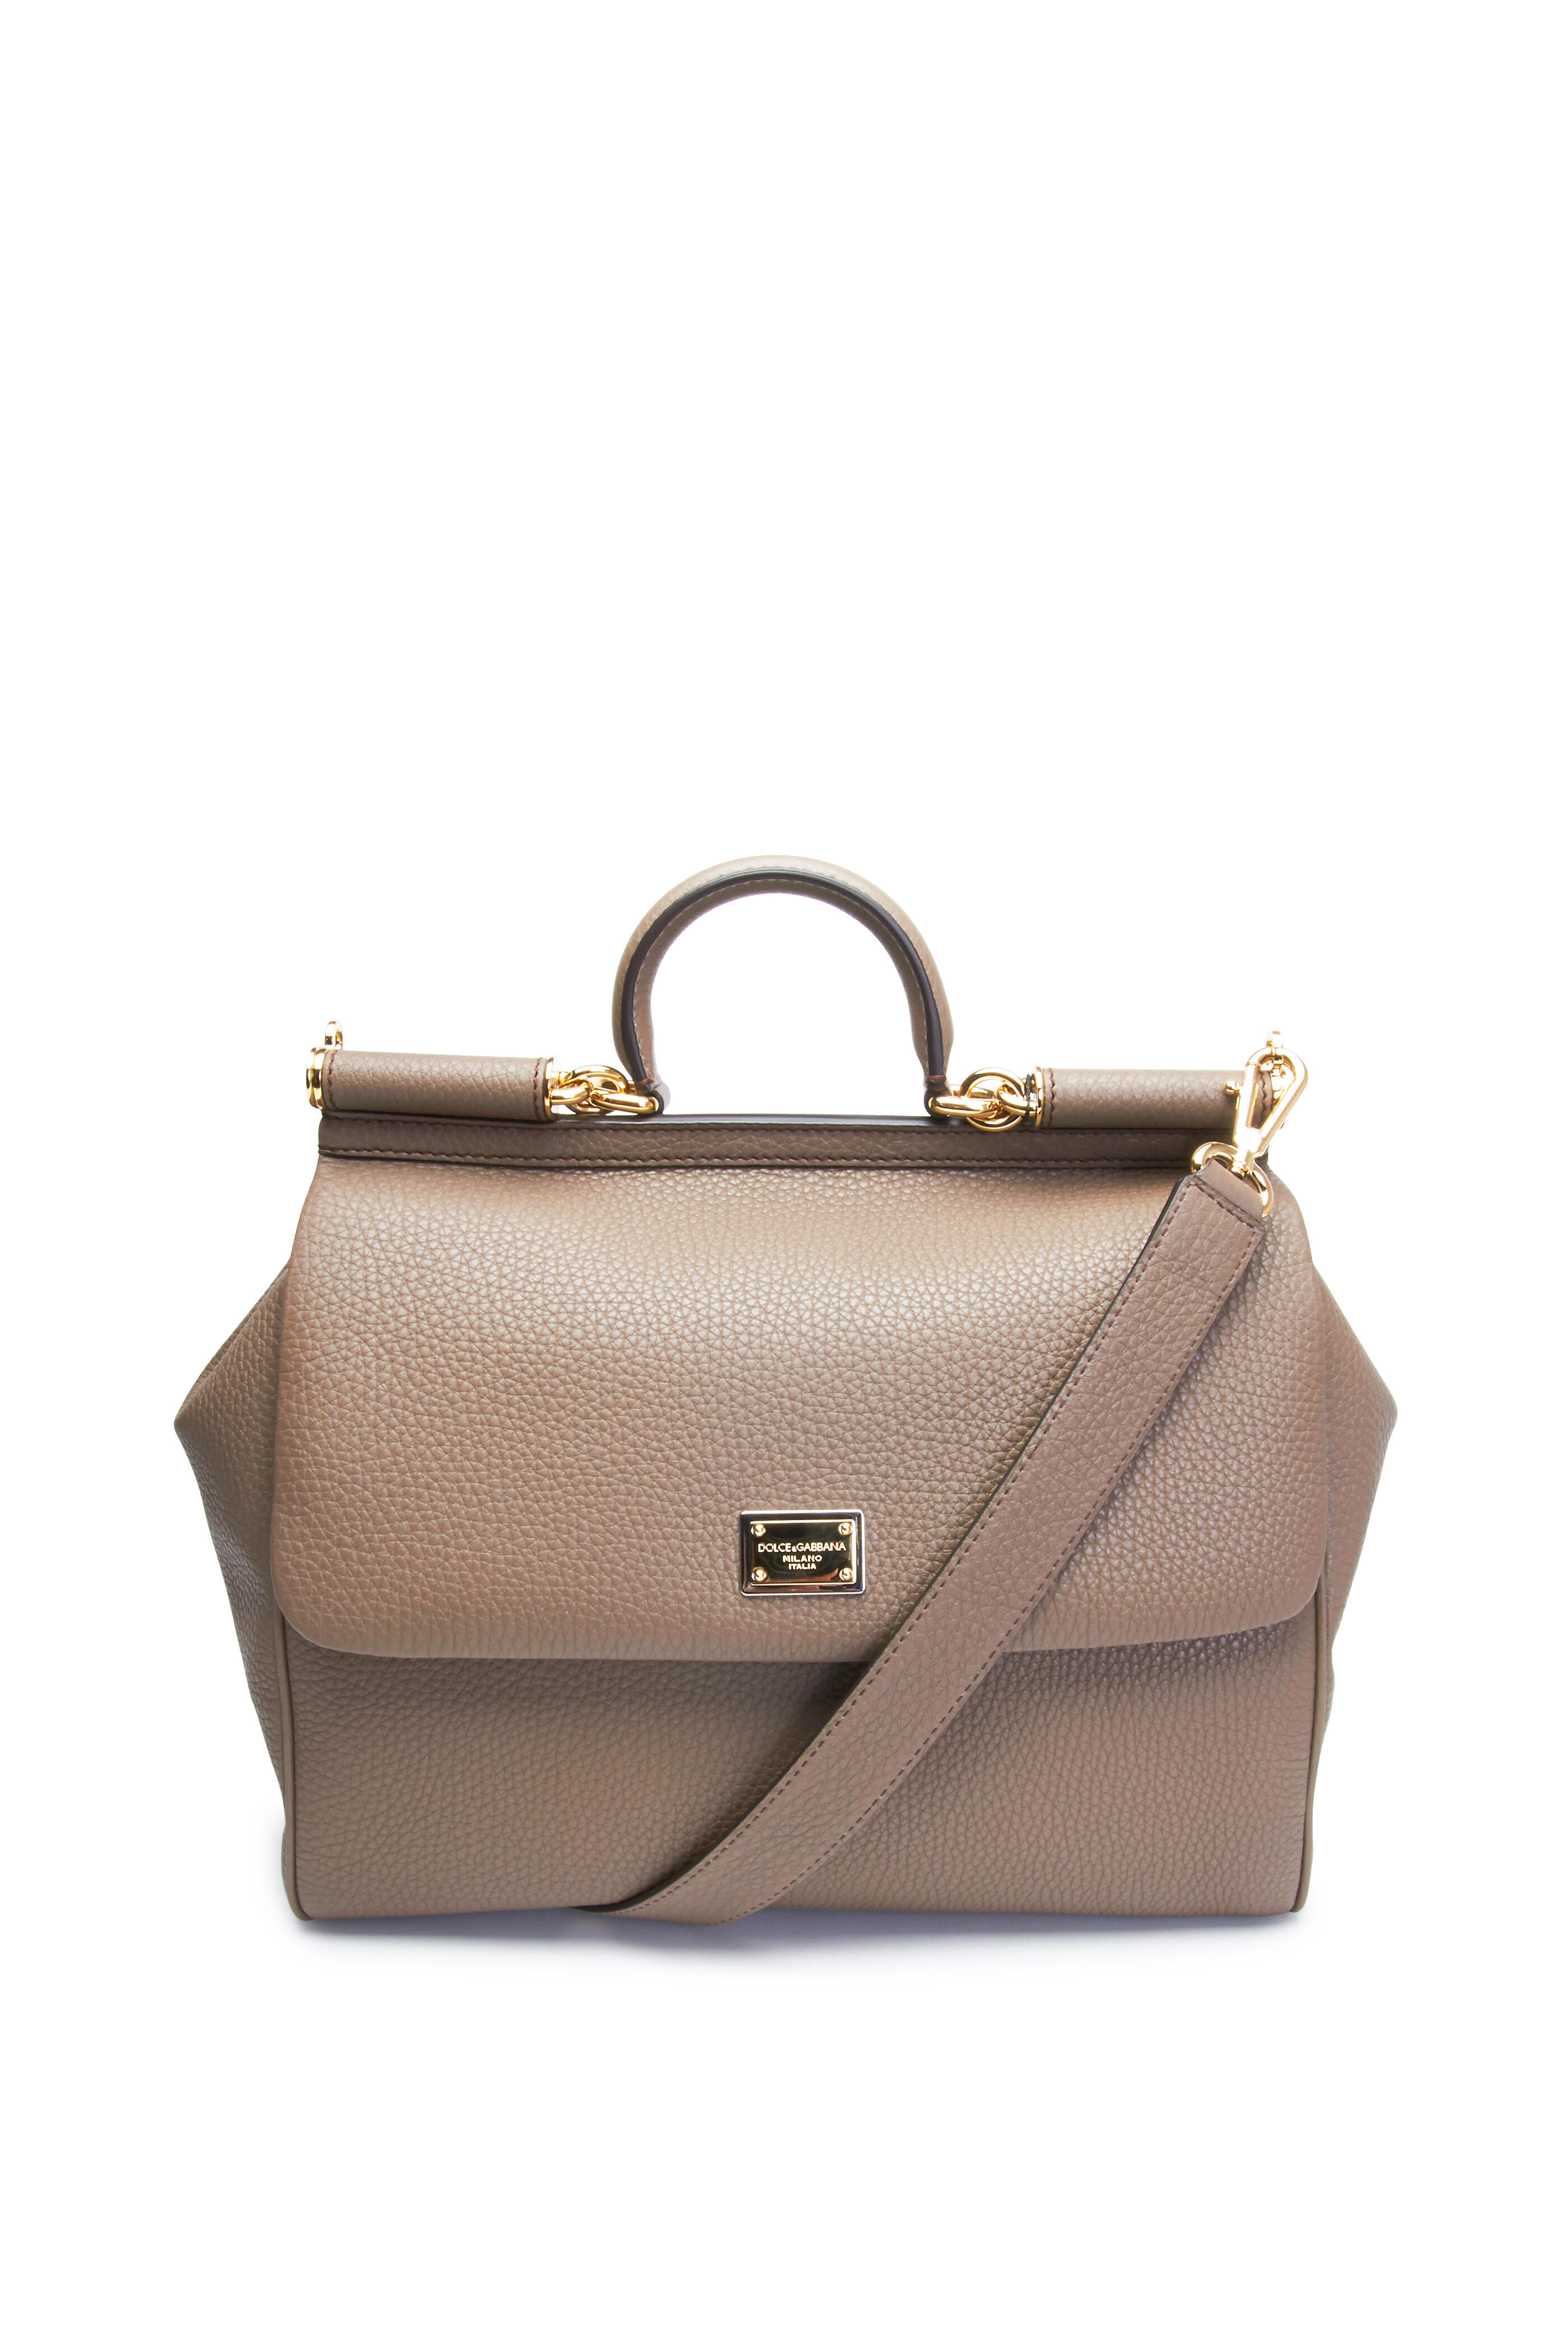 Dolce & Gabbana Taupe Leather Small Miss Sicily Top Handle Bag